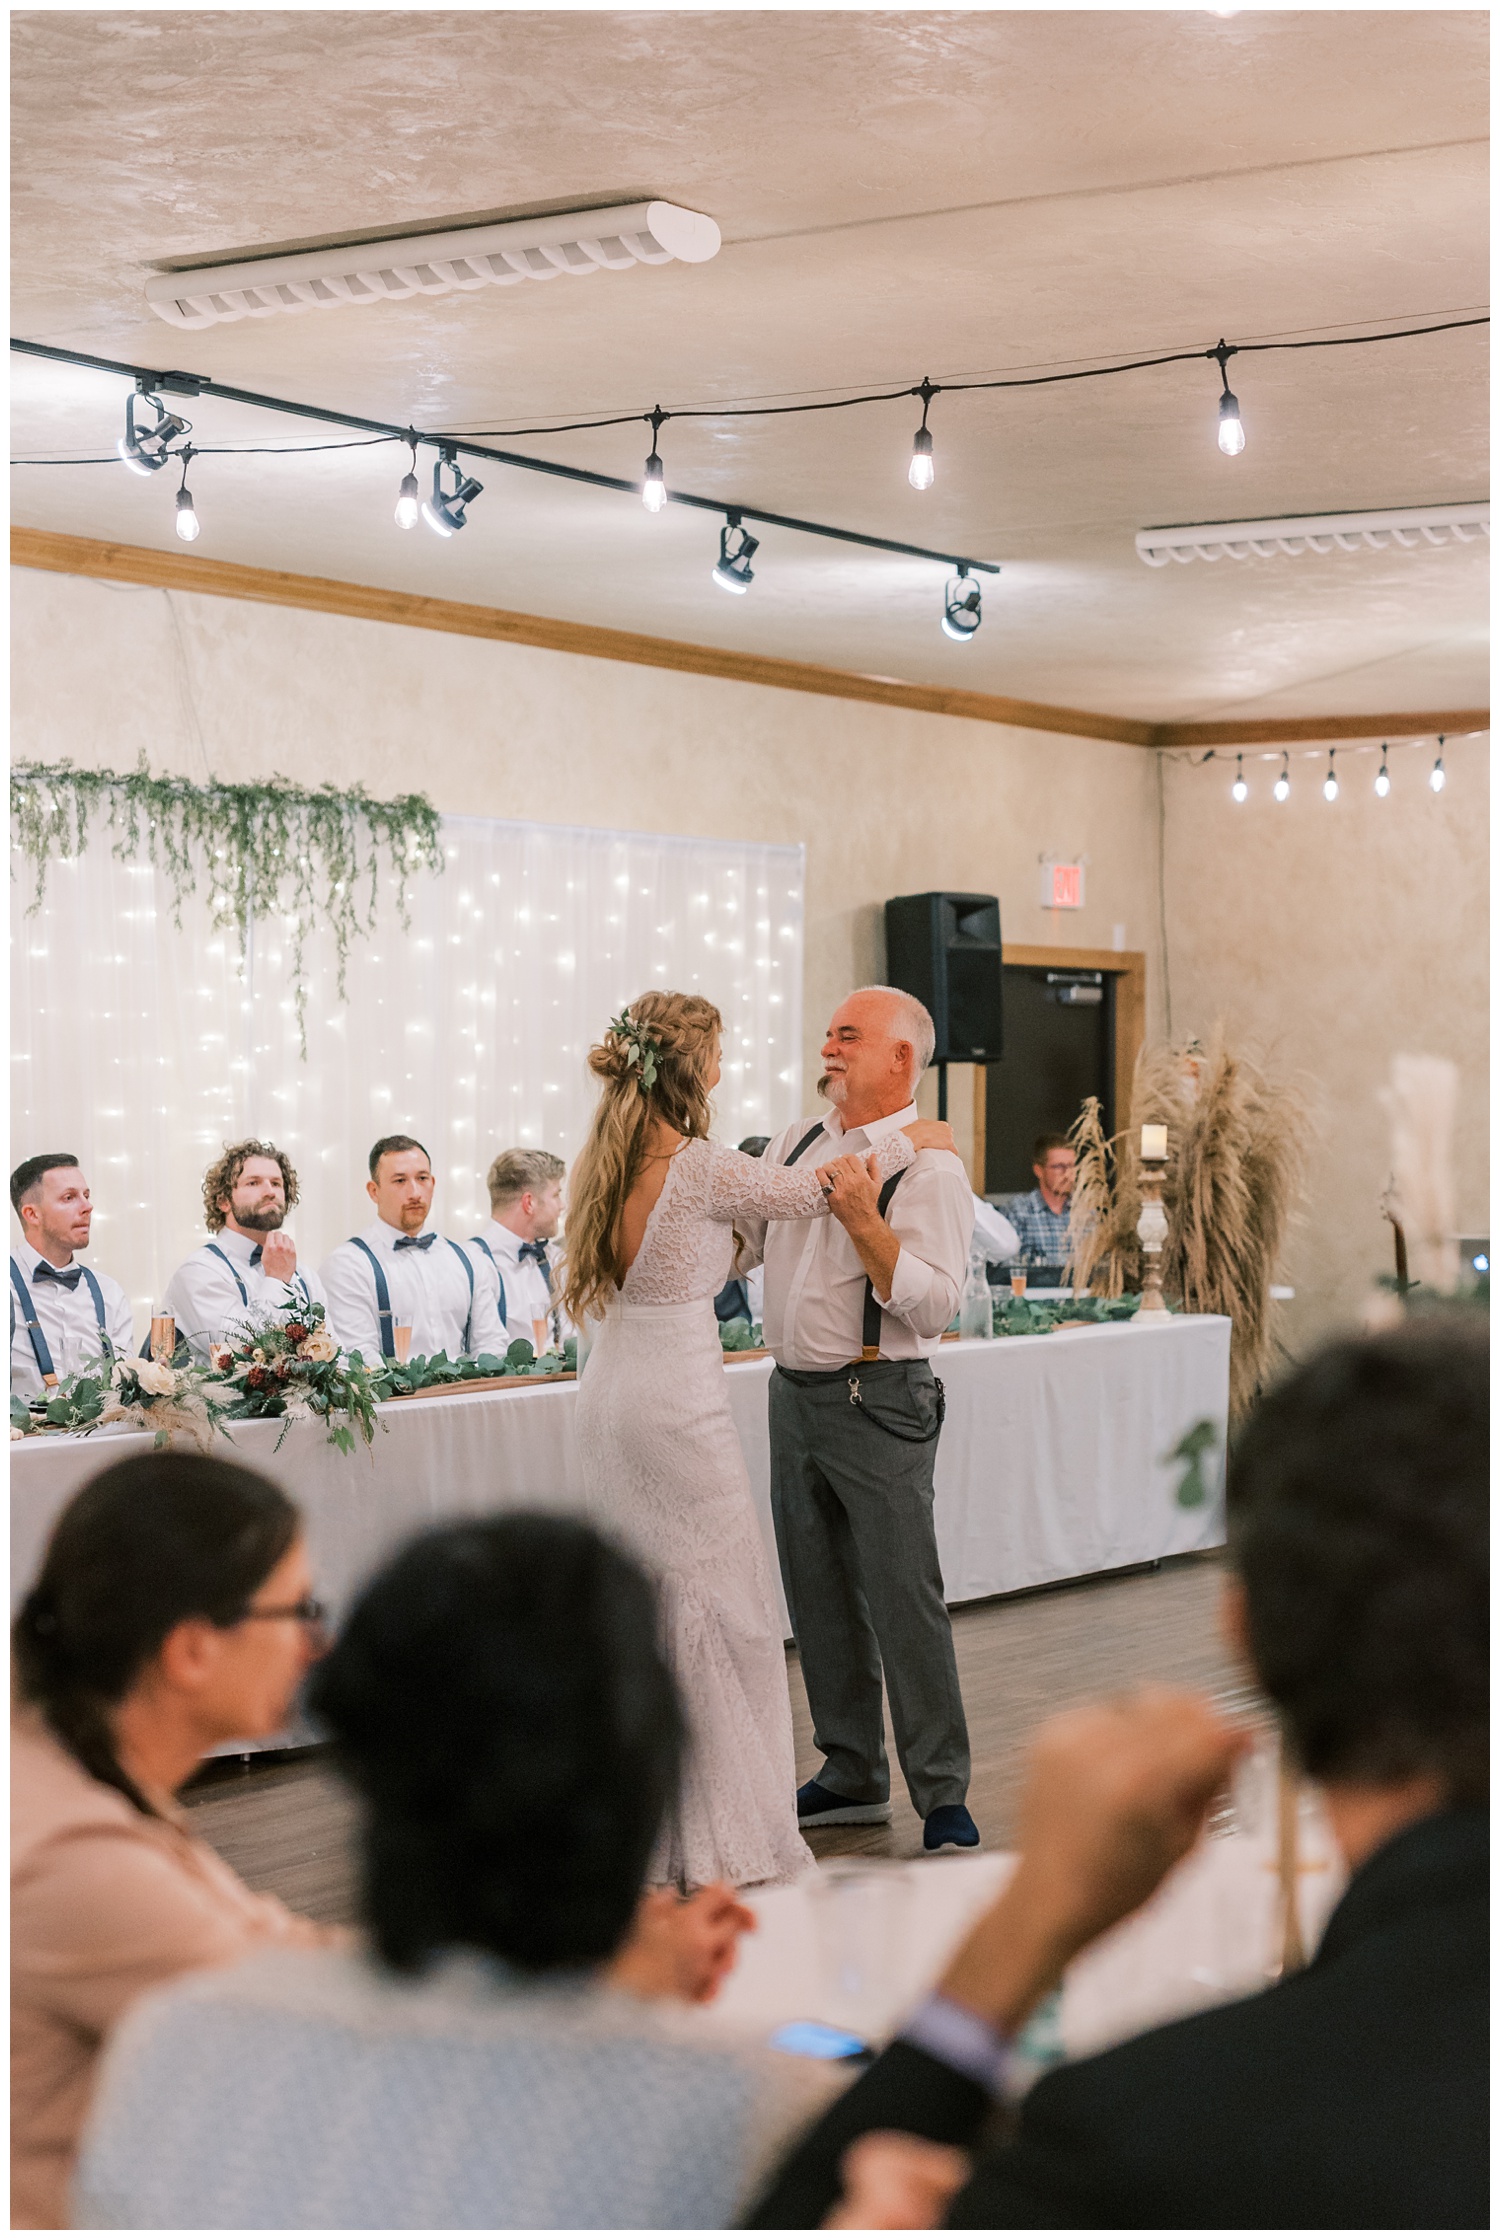 Father and daughter first dance at Illinois wedding reception